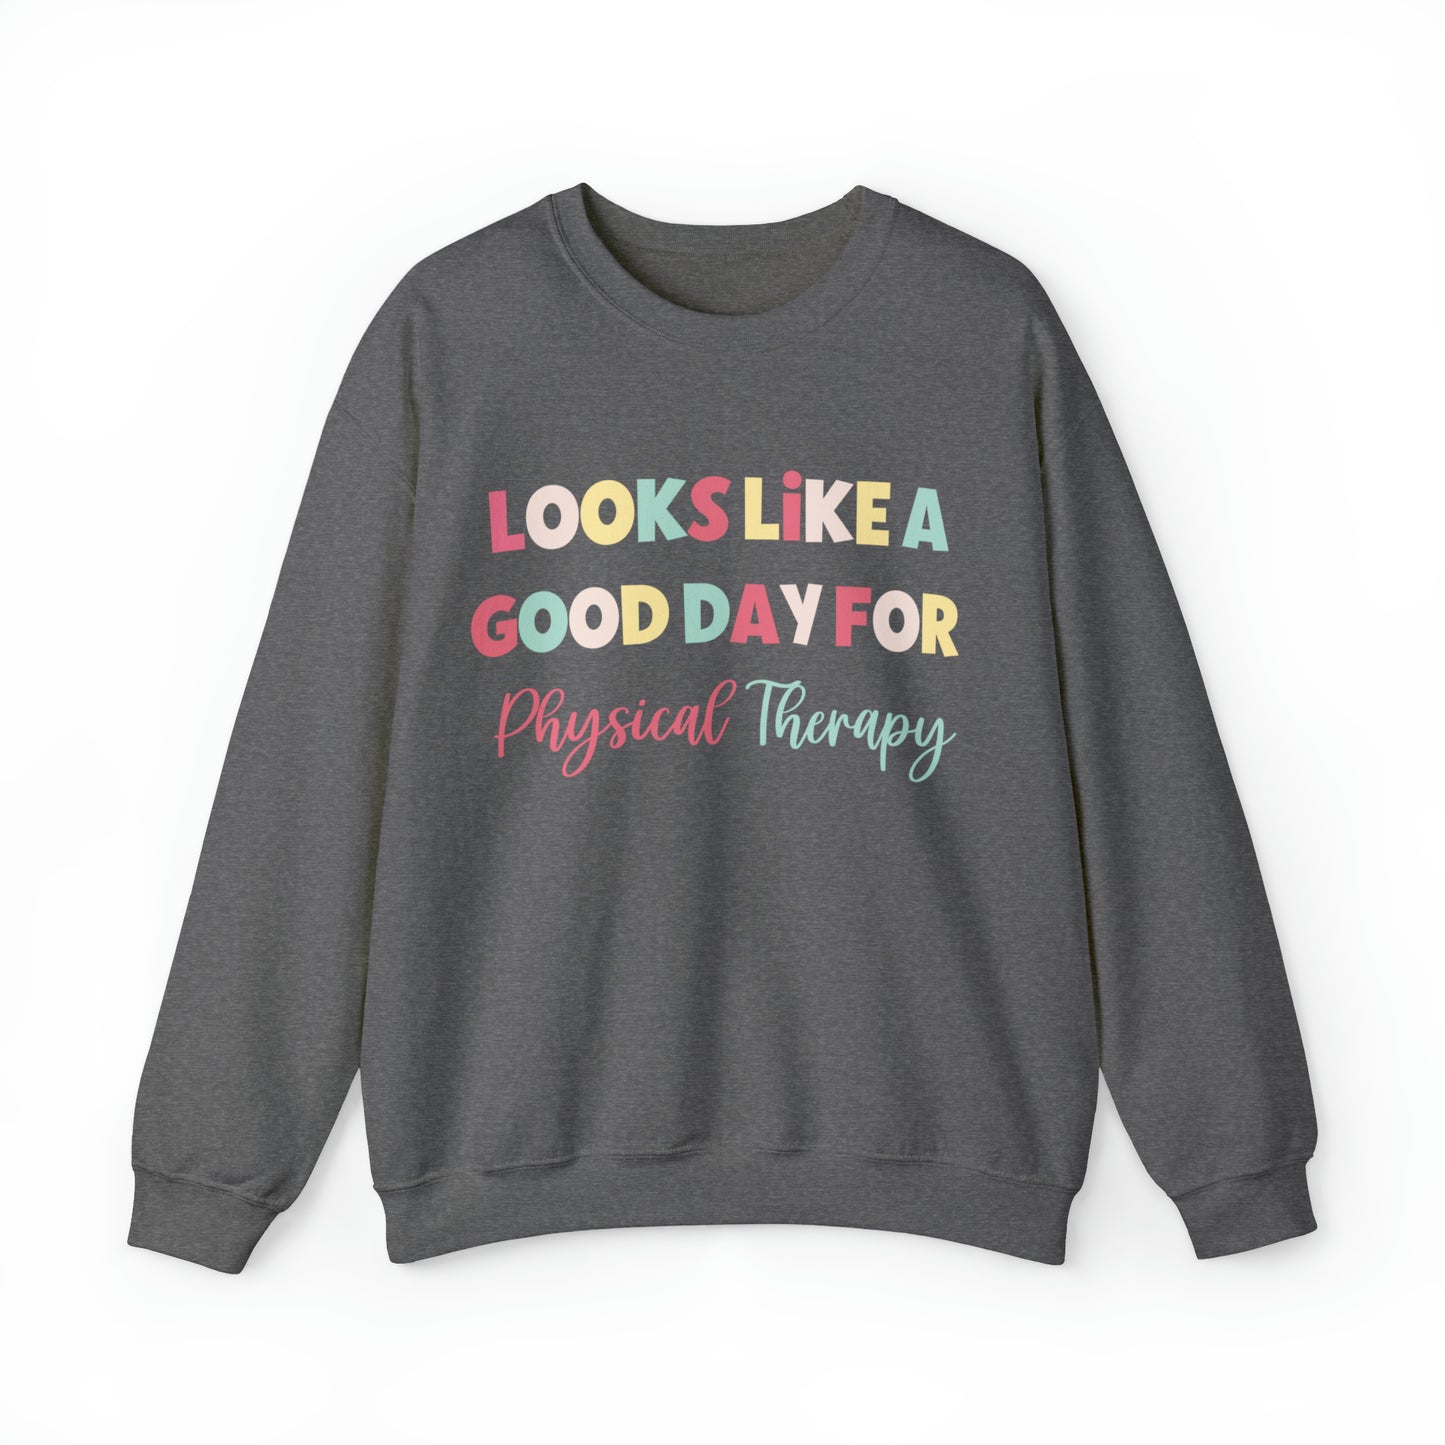 Looks Like A Good Day For Physical Therapy Crewneck Sweatshirt